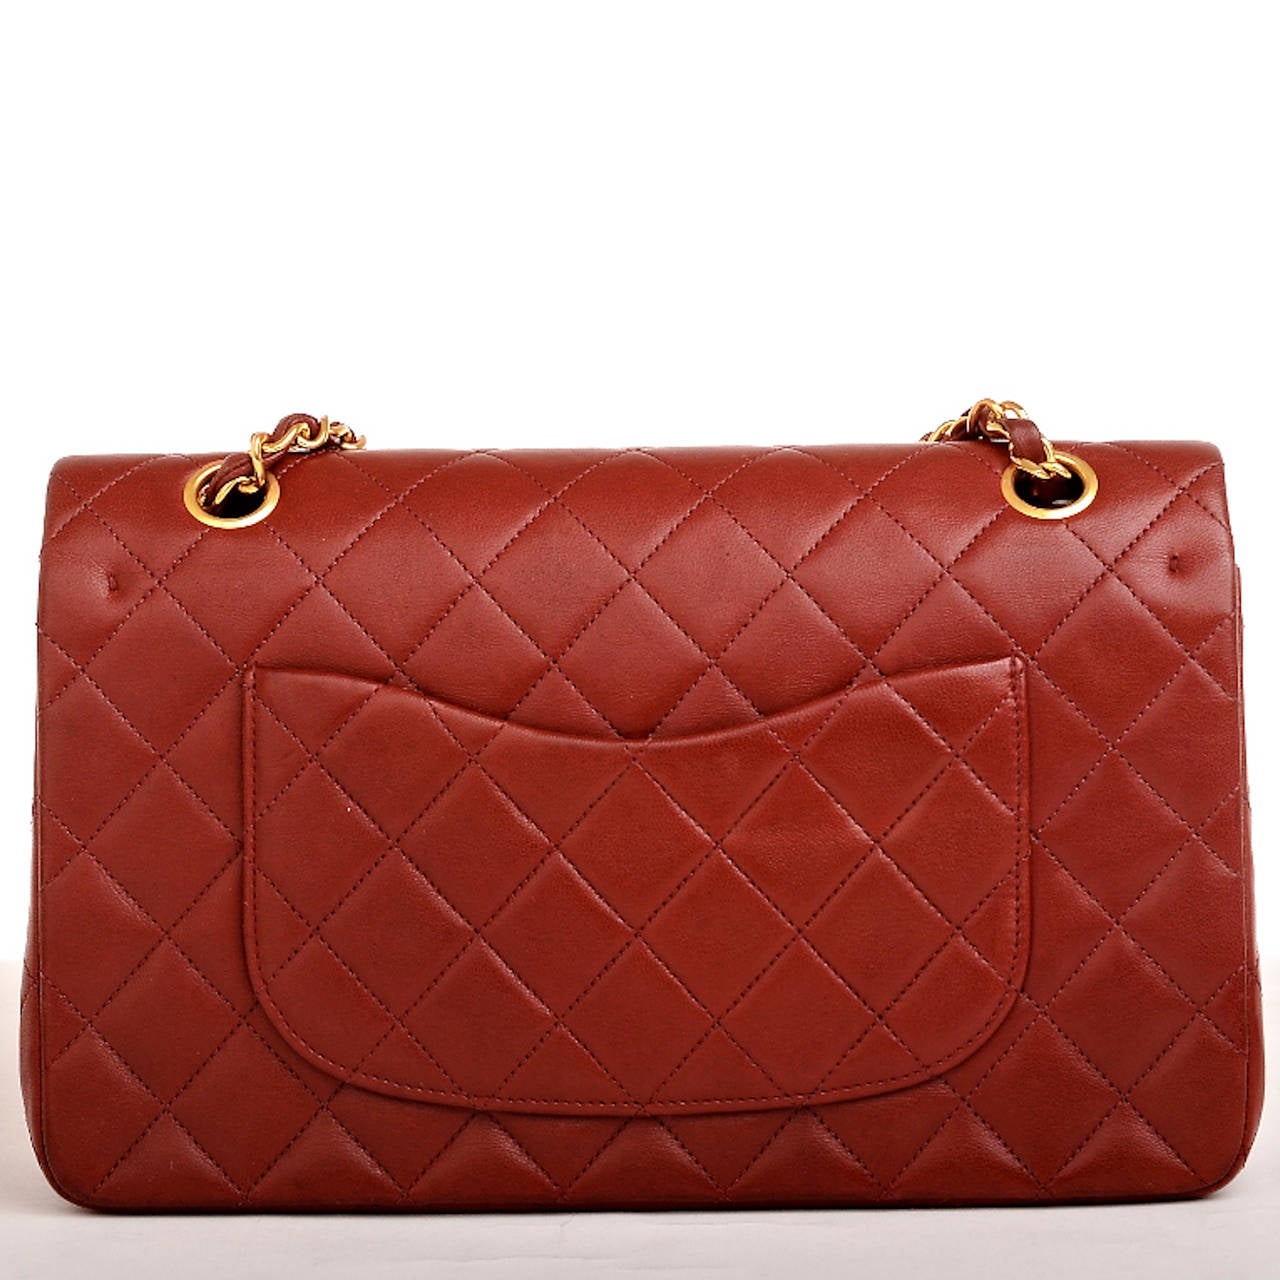 Women's Chanel Vintage Dark Red Lambskin Large Classic Double Flap Bag